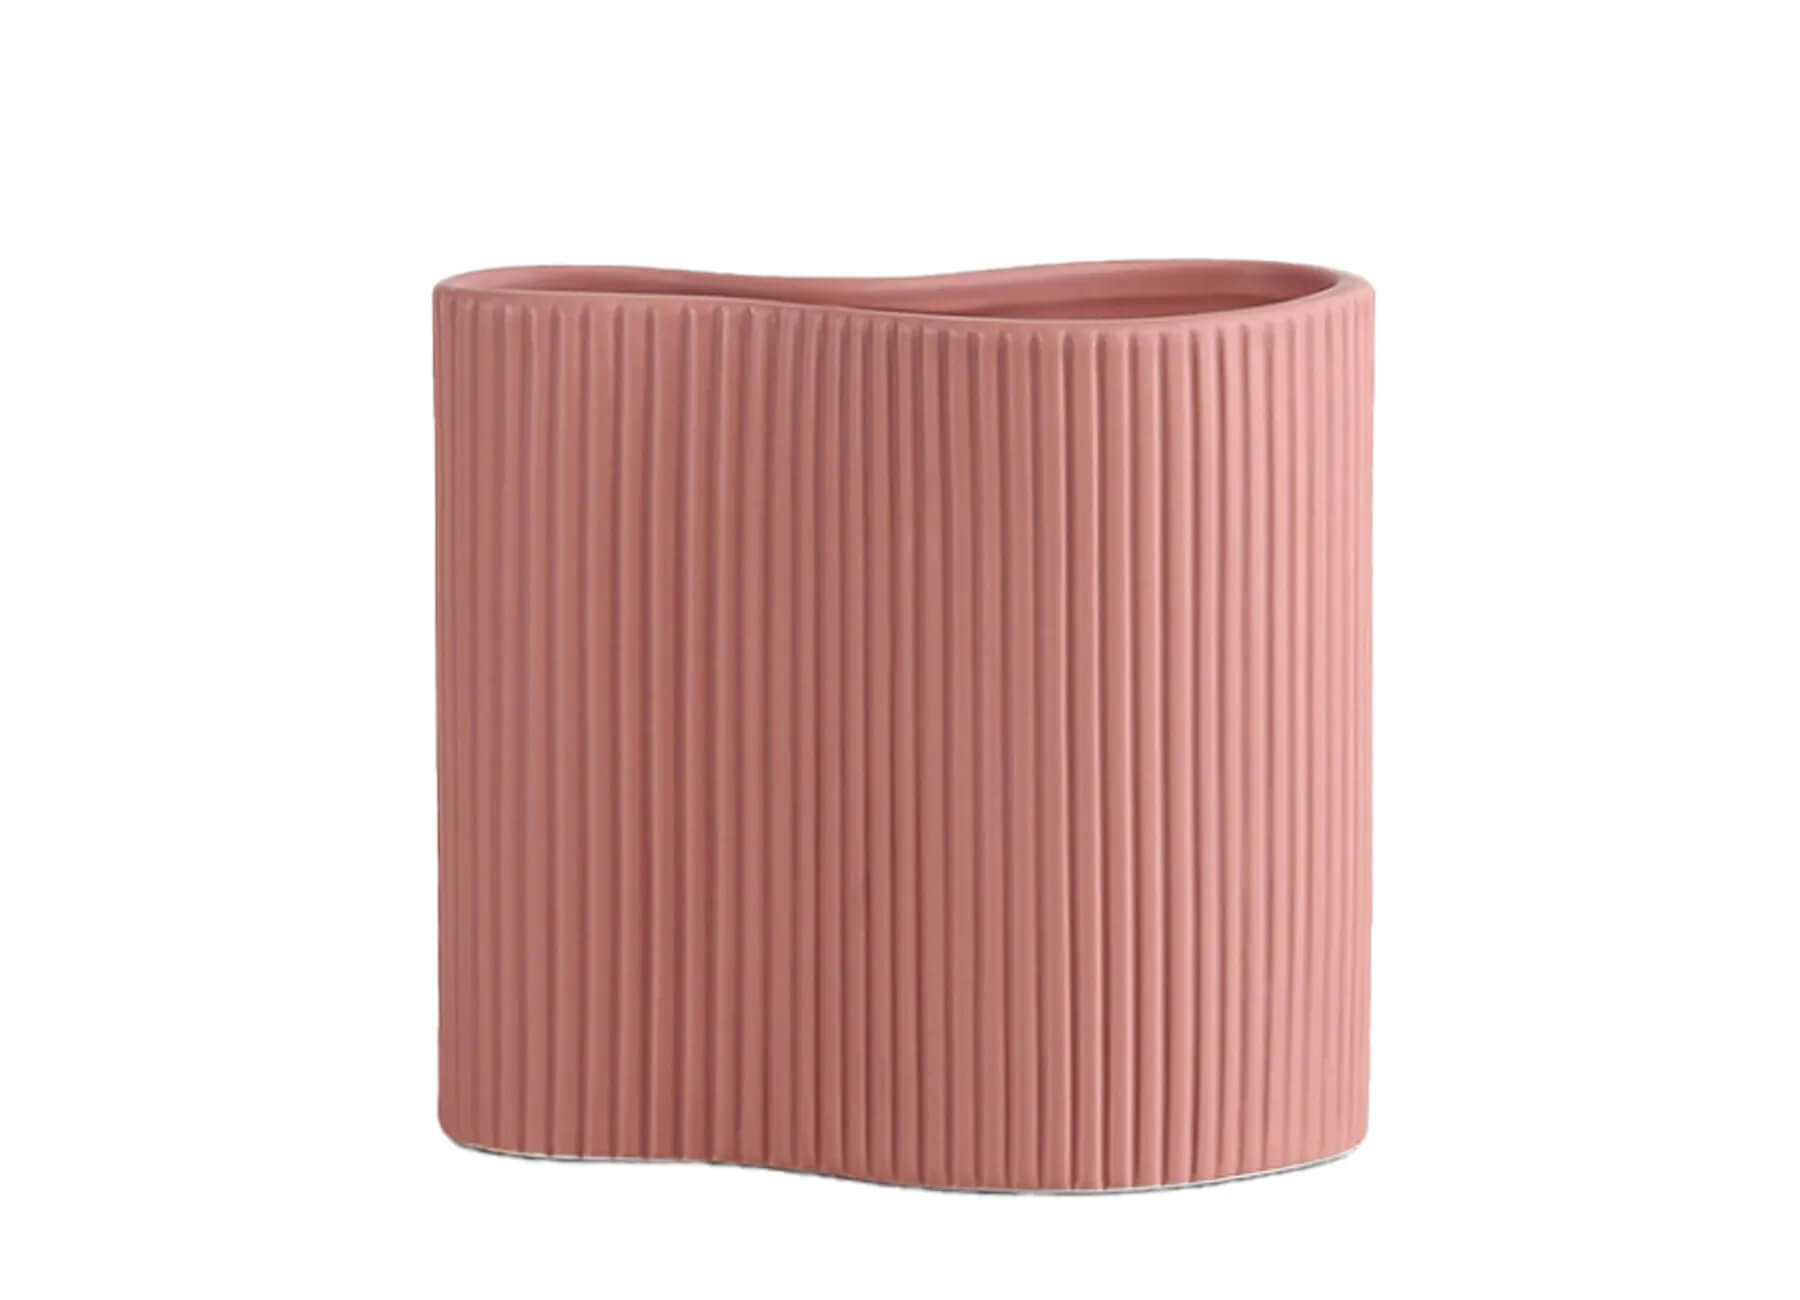 Peach Fuzz-inspired pleated ceramic vase from The Commune Life, adding a modern touch to interior design aesthetics